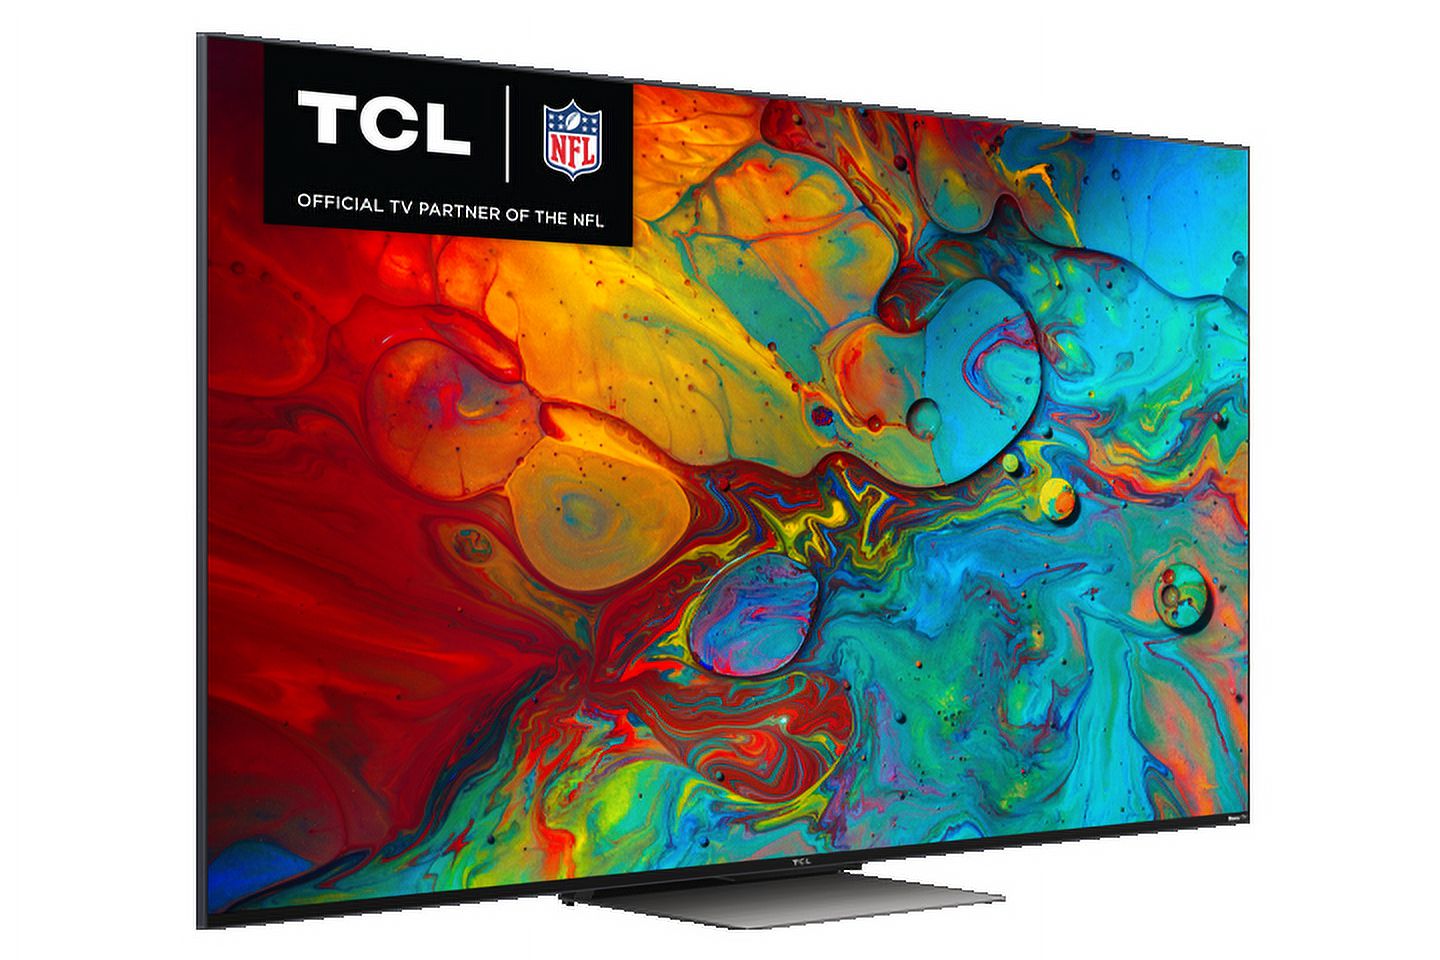 TCL 75" Class 6-Series 4K Mini-LED UHD QLED Dolby Vision HDR Smart Roku TV – 75R655 (New) - image 2 of 7